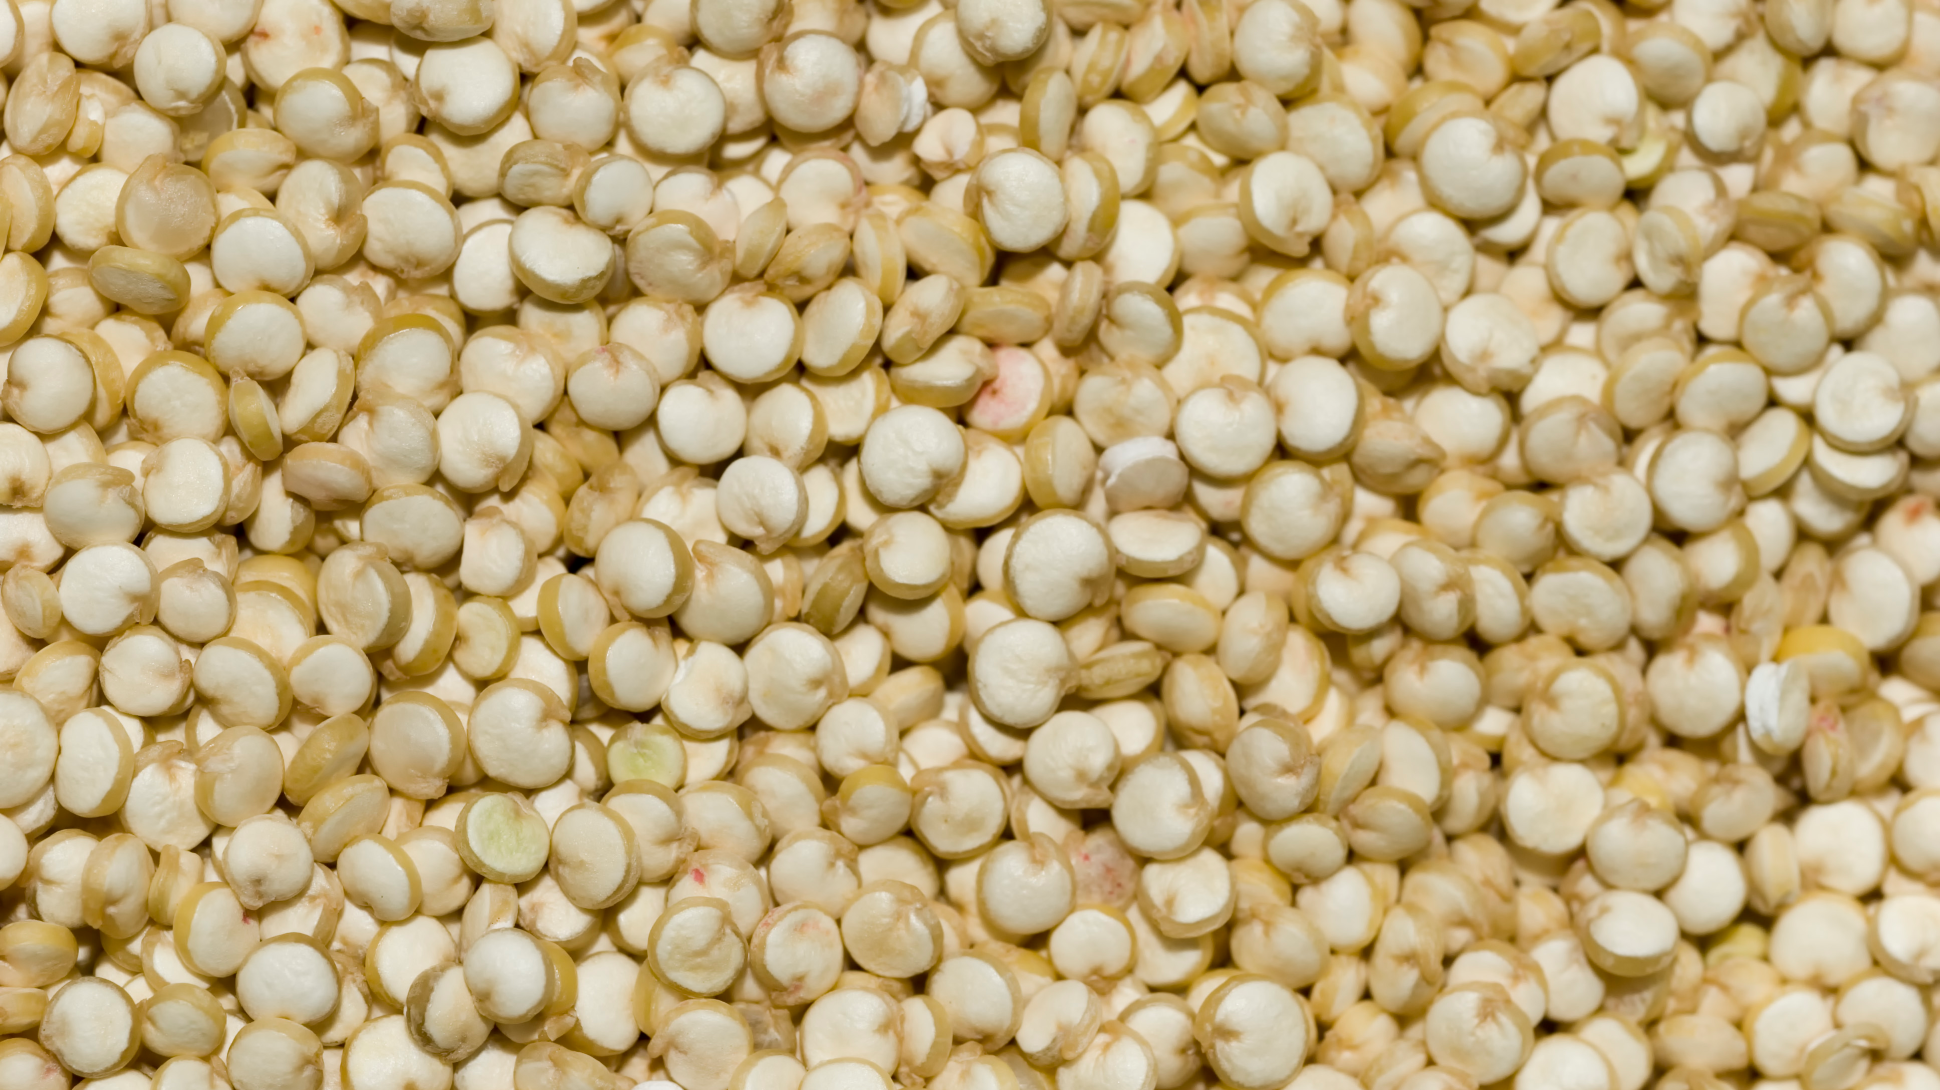 A close up of multiple white round quinoa seeds